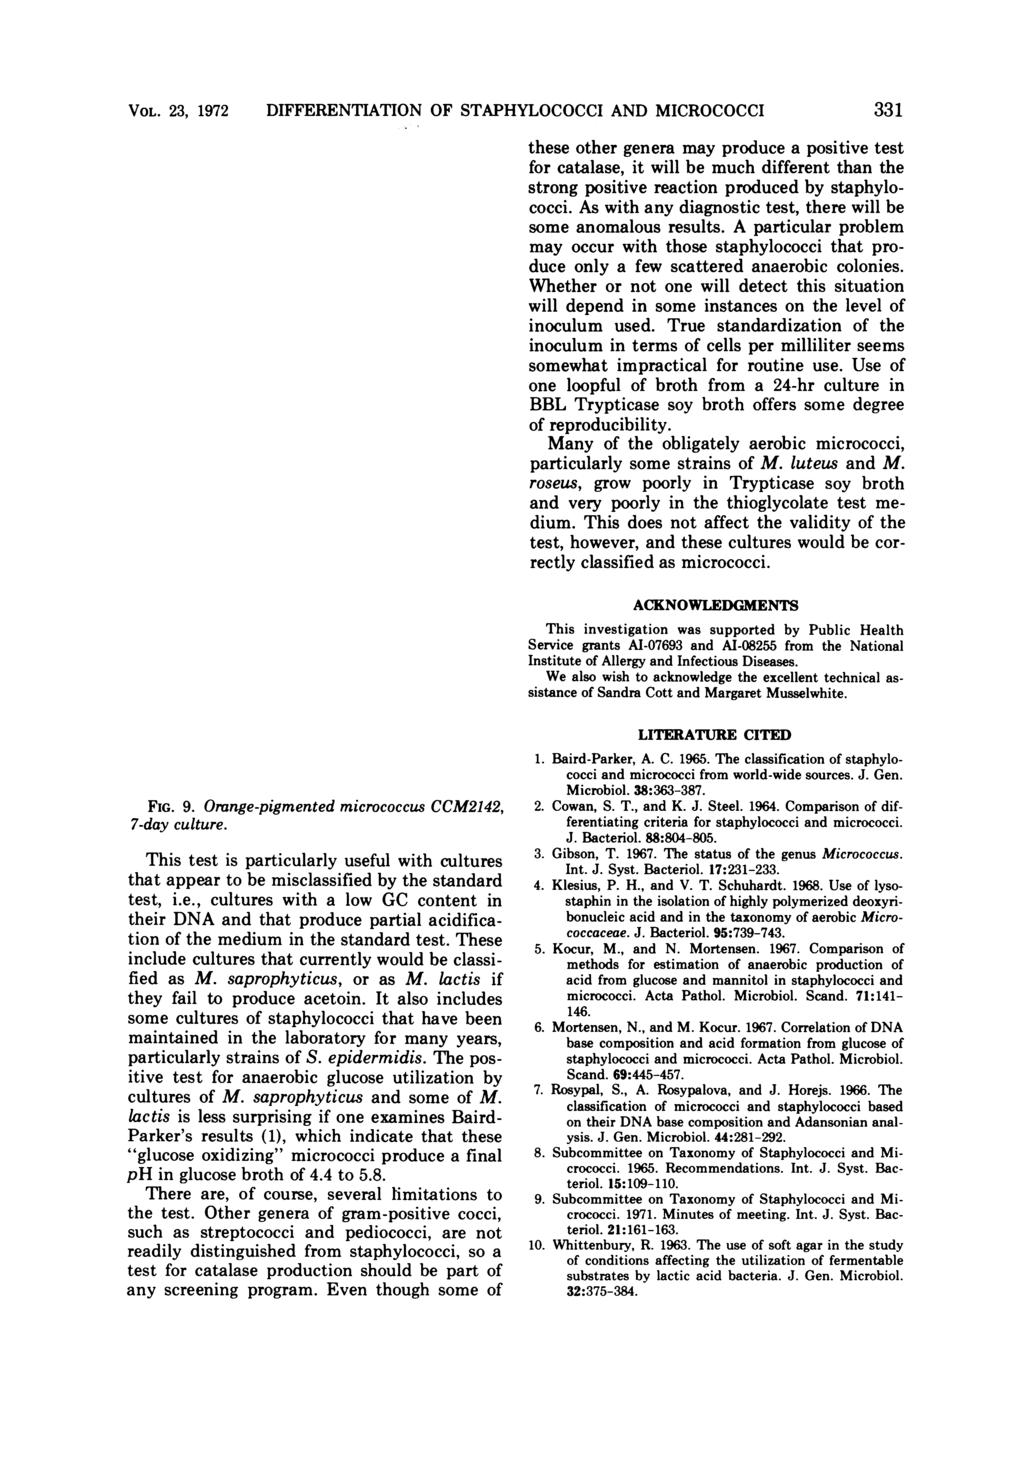 VOL. 23, 1972 DIFFERENTIATION OF STAPHYLOCOCCI AND MICROCOCCI 331 these other genera may produce a positive test for catalase, it will be much different than the strong positive reaction produced by